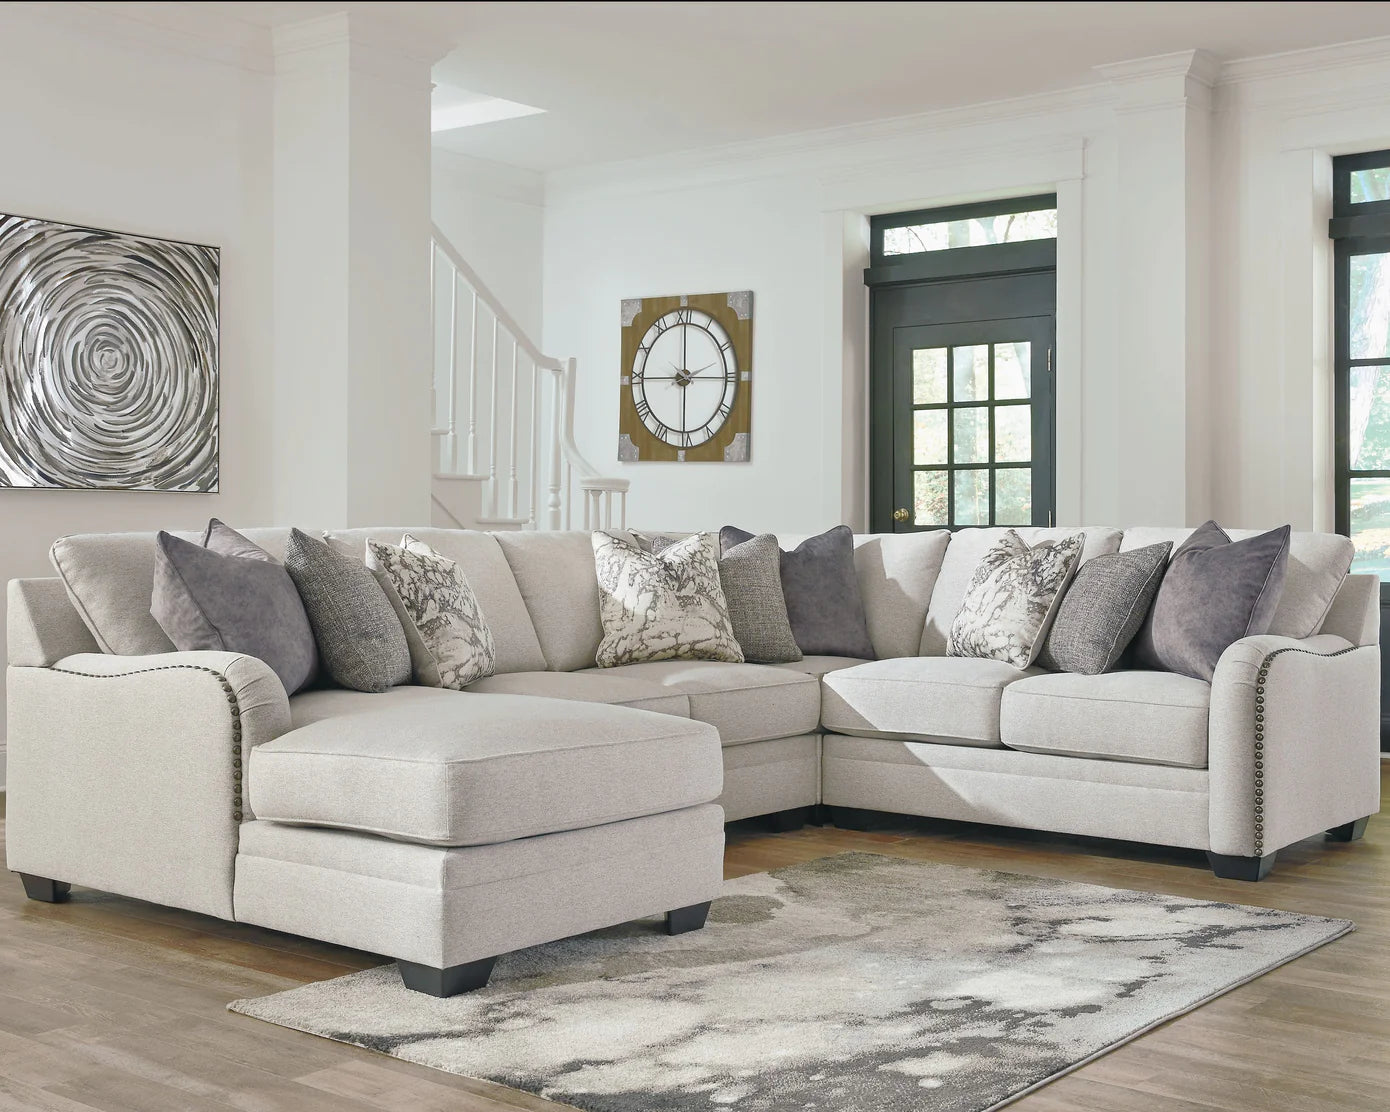 Texas-Sized Style: Furniture Trends for Your Lone Star Home